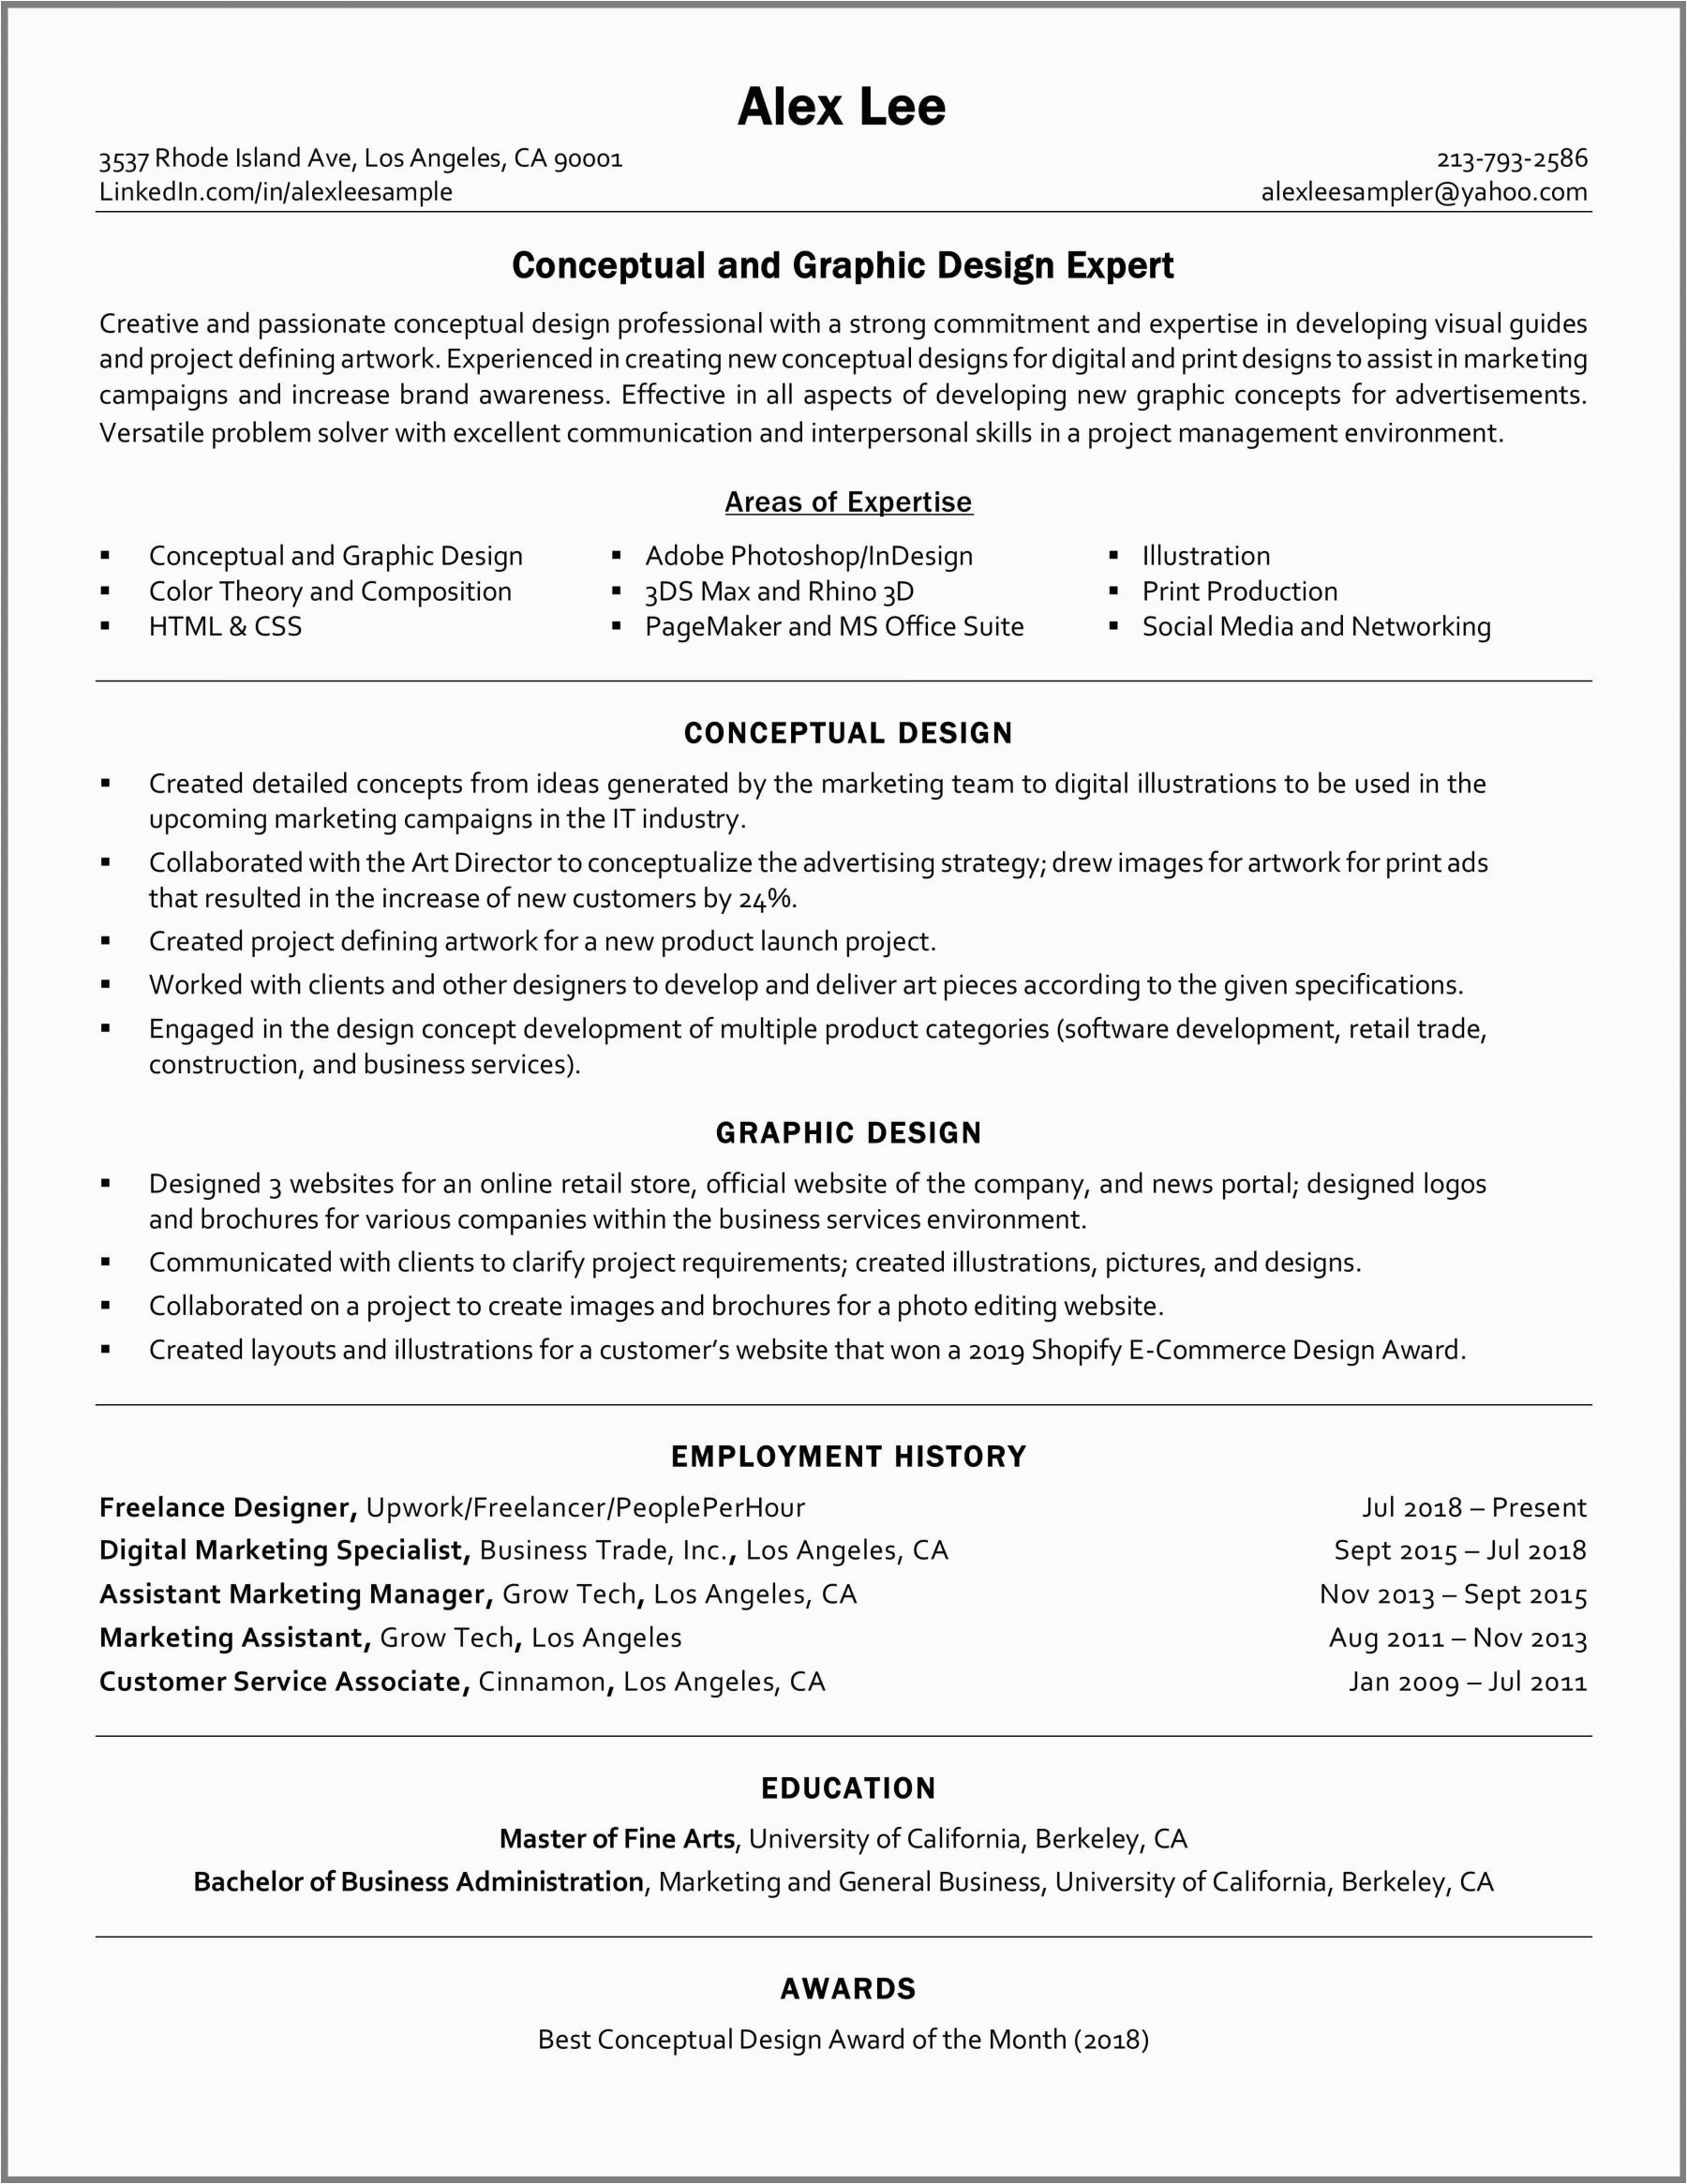 Samples Of A Functional Resume Template Functional Resume Tips and Template